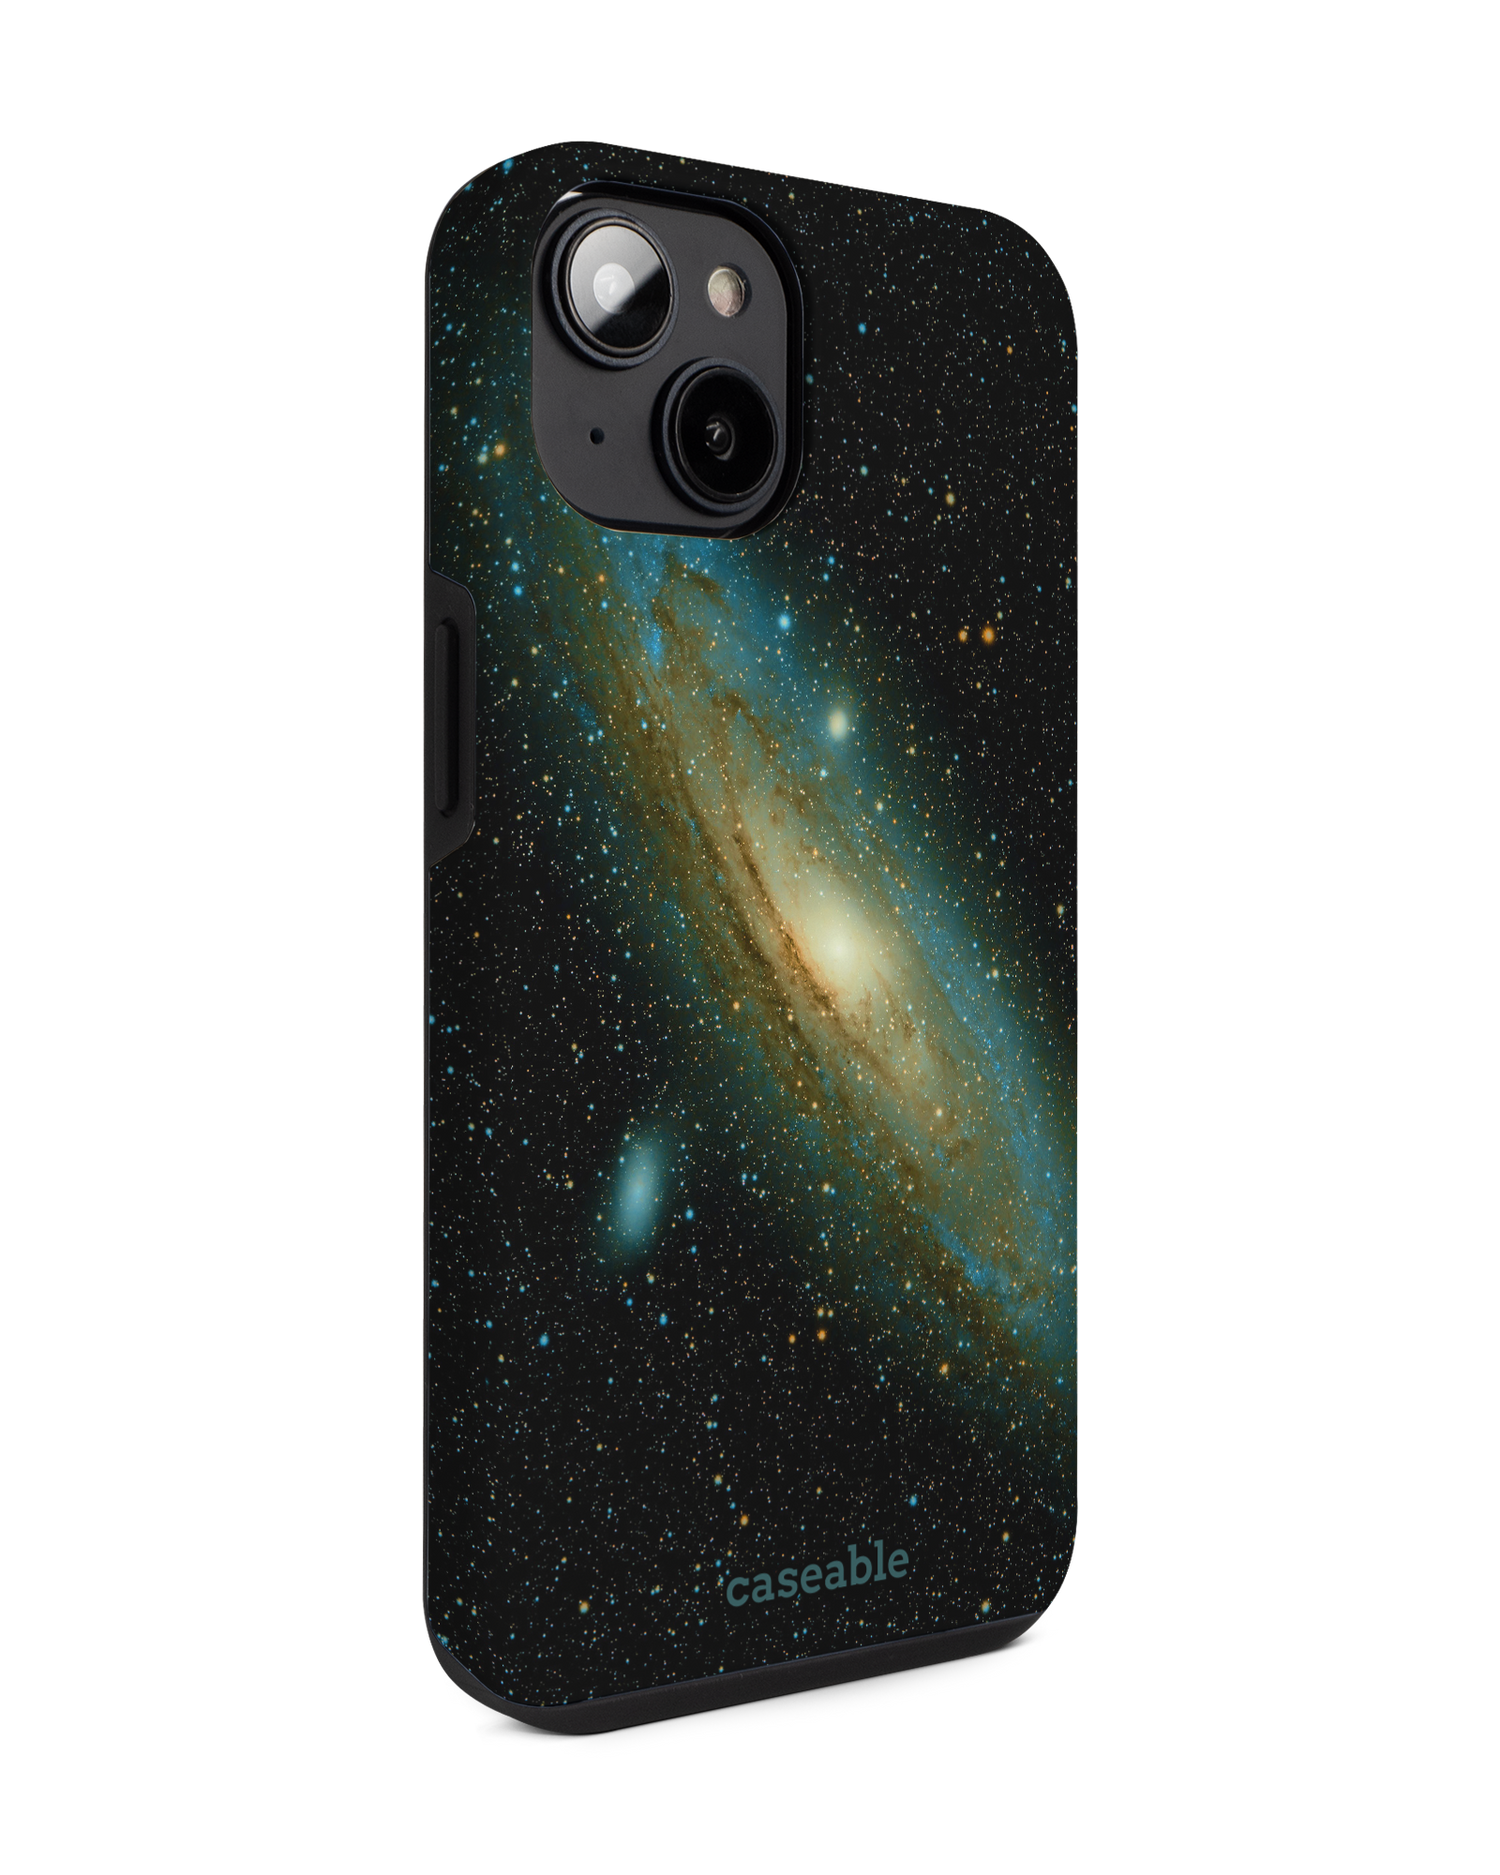 Outer Space Premium Phone for Apple iPhone 14: View from the left side